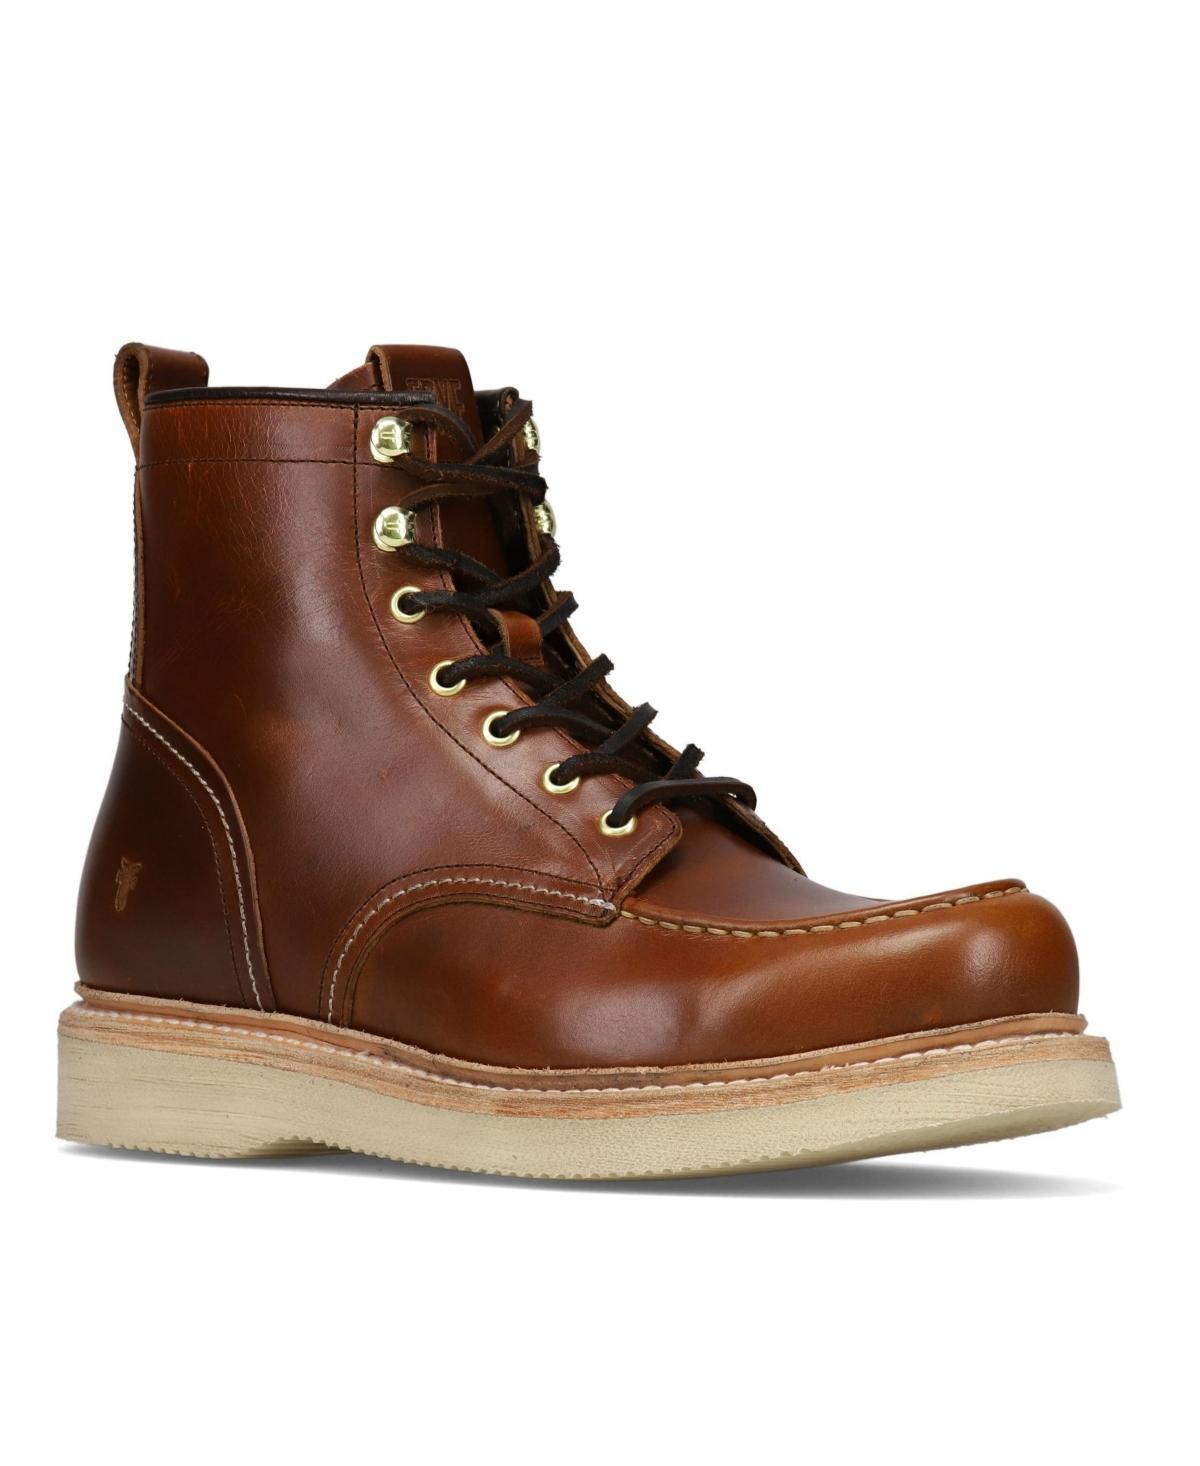 Frye Mens Hudson Leather Wedge Work Boots Product Image